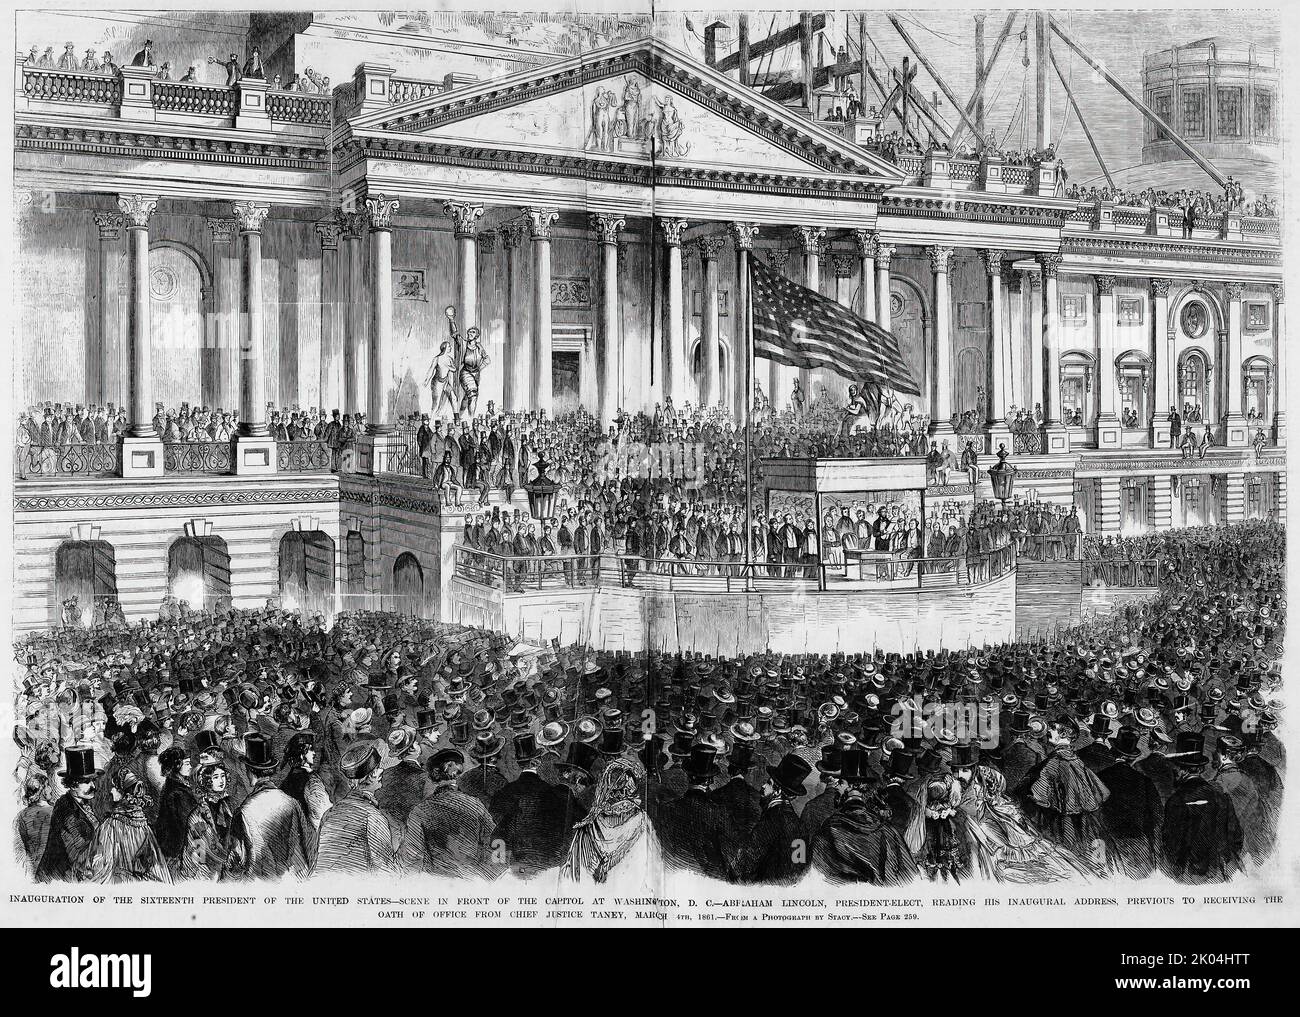 Inauguration of the Sixteenth President of the United States - Scene in front of the Capitol at Washington, D. C. - Abraham Lincoln, President Elect, reading his inaugural address, previous to receiving the Oath of Office from Chief Justice Roger B. Taney, March 4th, 1861. 19th century illustration from Frank Leslie's Illustrated Newspaper Stock Photo